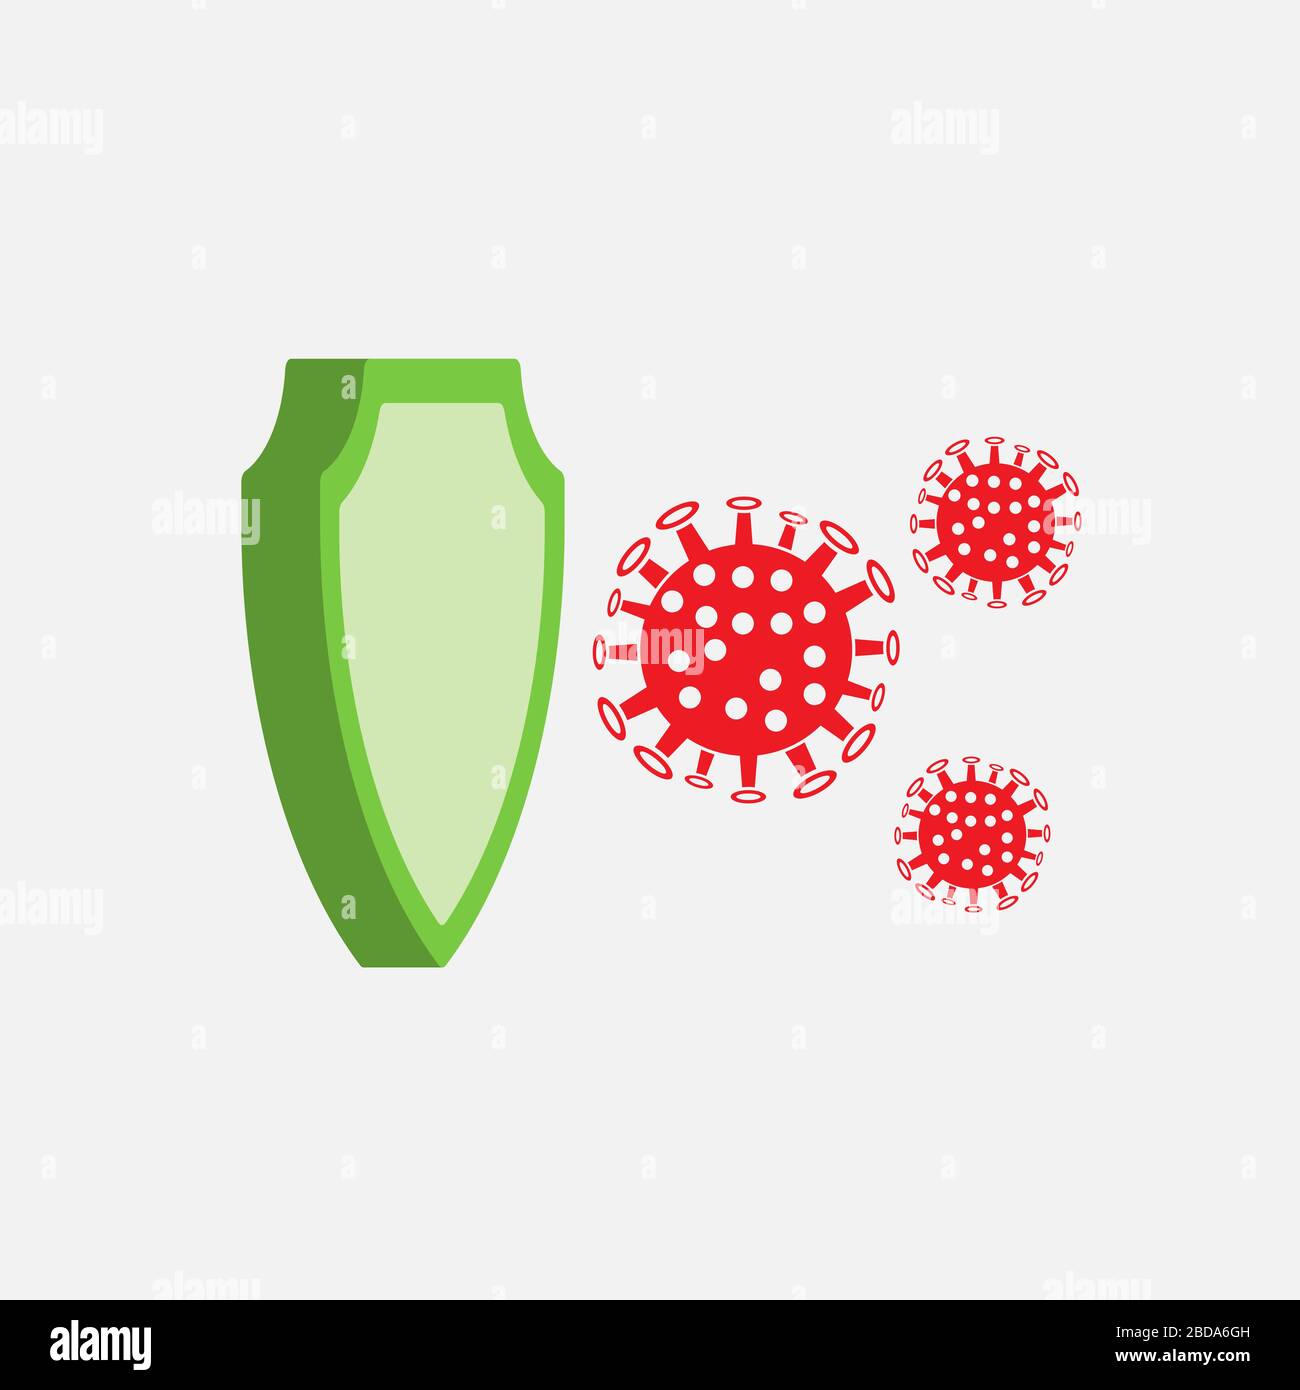 Coronavirus 2019 nCov with shield protection from the virus icon. Virus and epidemic, bacterium, microbiology, pandemic symbol. Flat design. Stock - Stock Vector